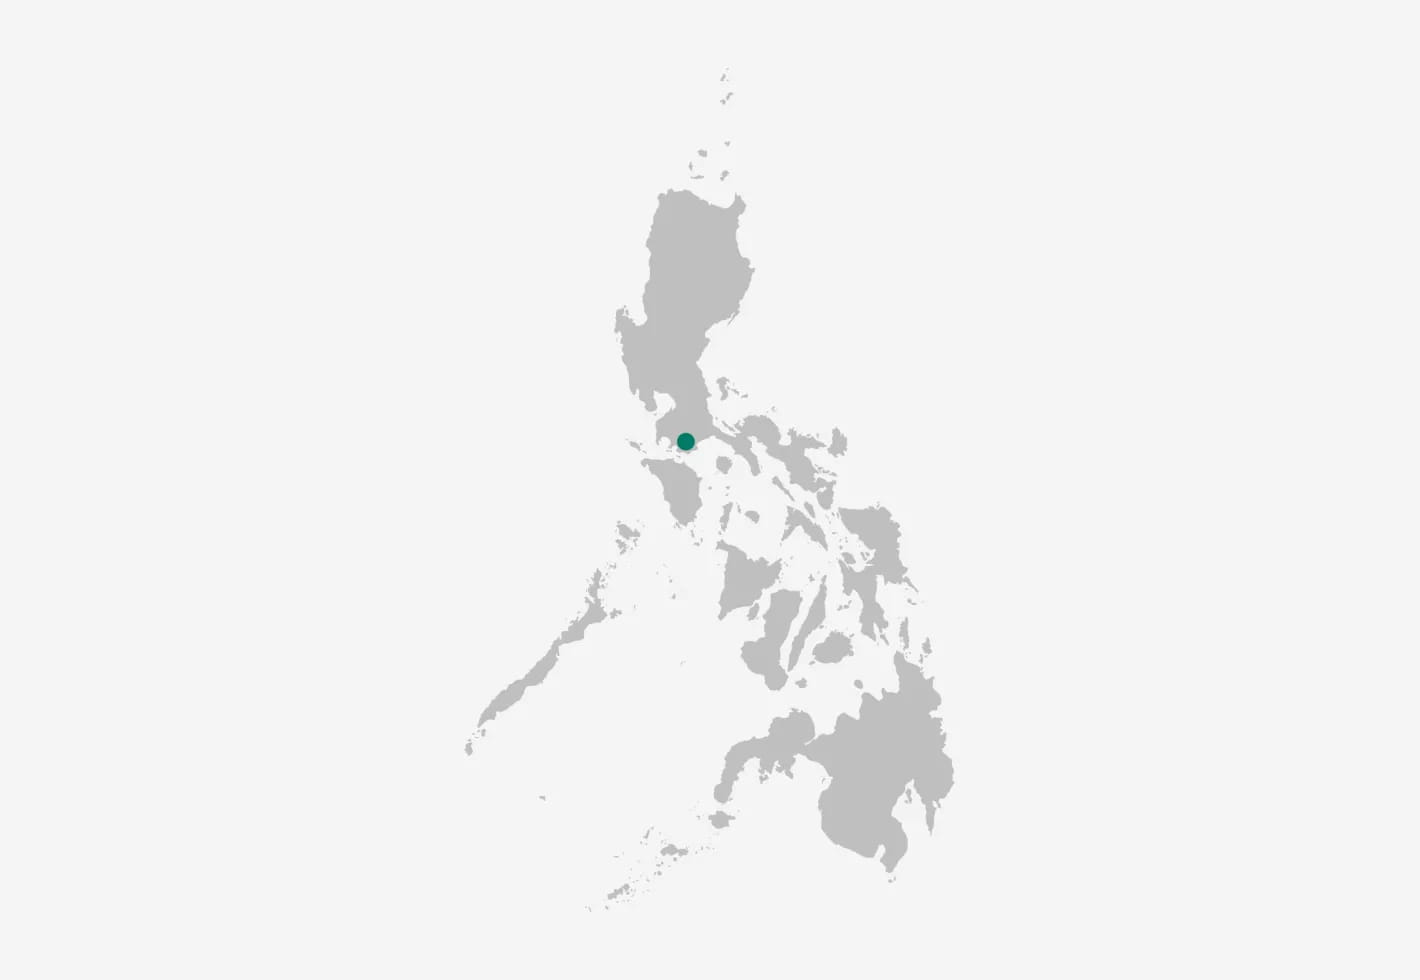 Our presence in Philippines